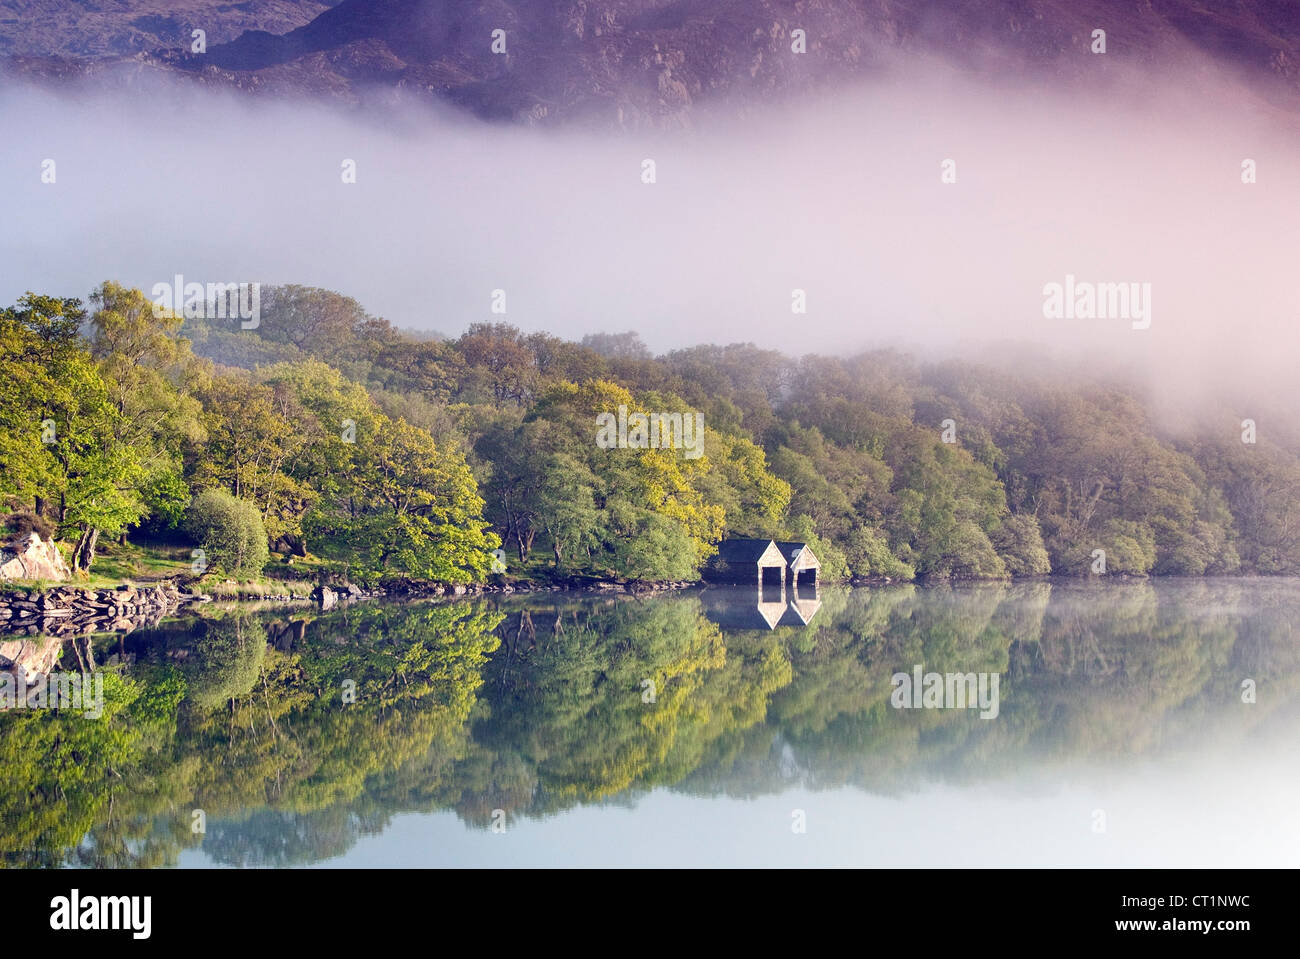 Boathouse on tree lined north western shore of a misty Llyn Dinas Lake in the Nantgwynant Valley Snowdonia North Wales Stock Photo